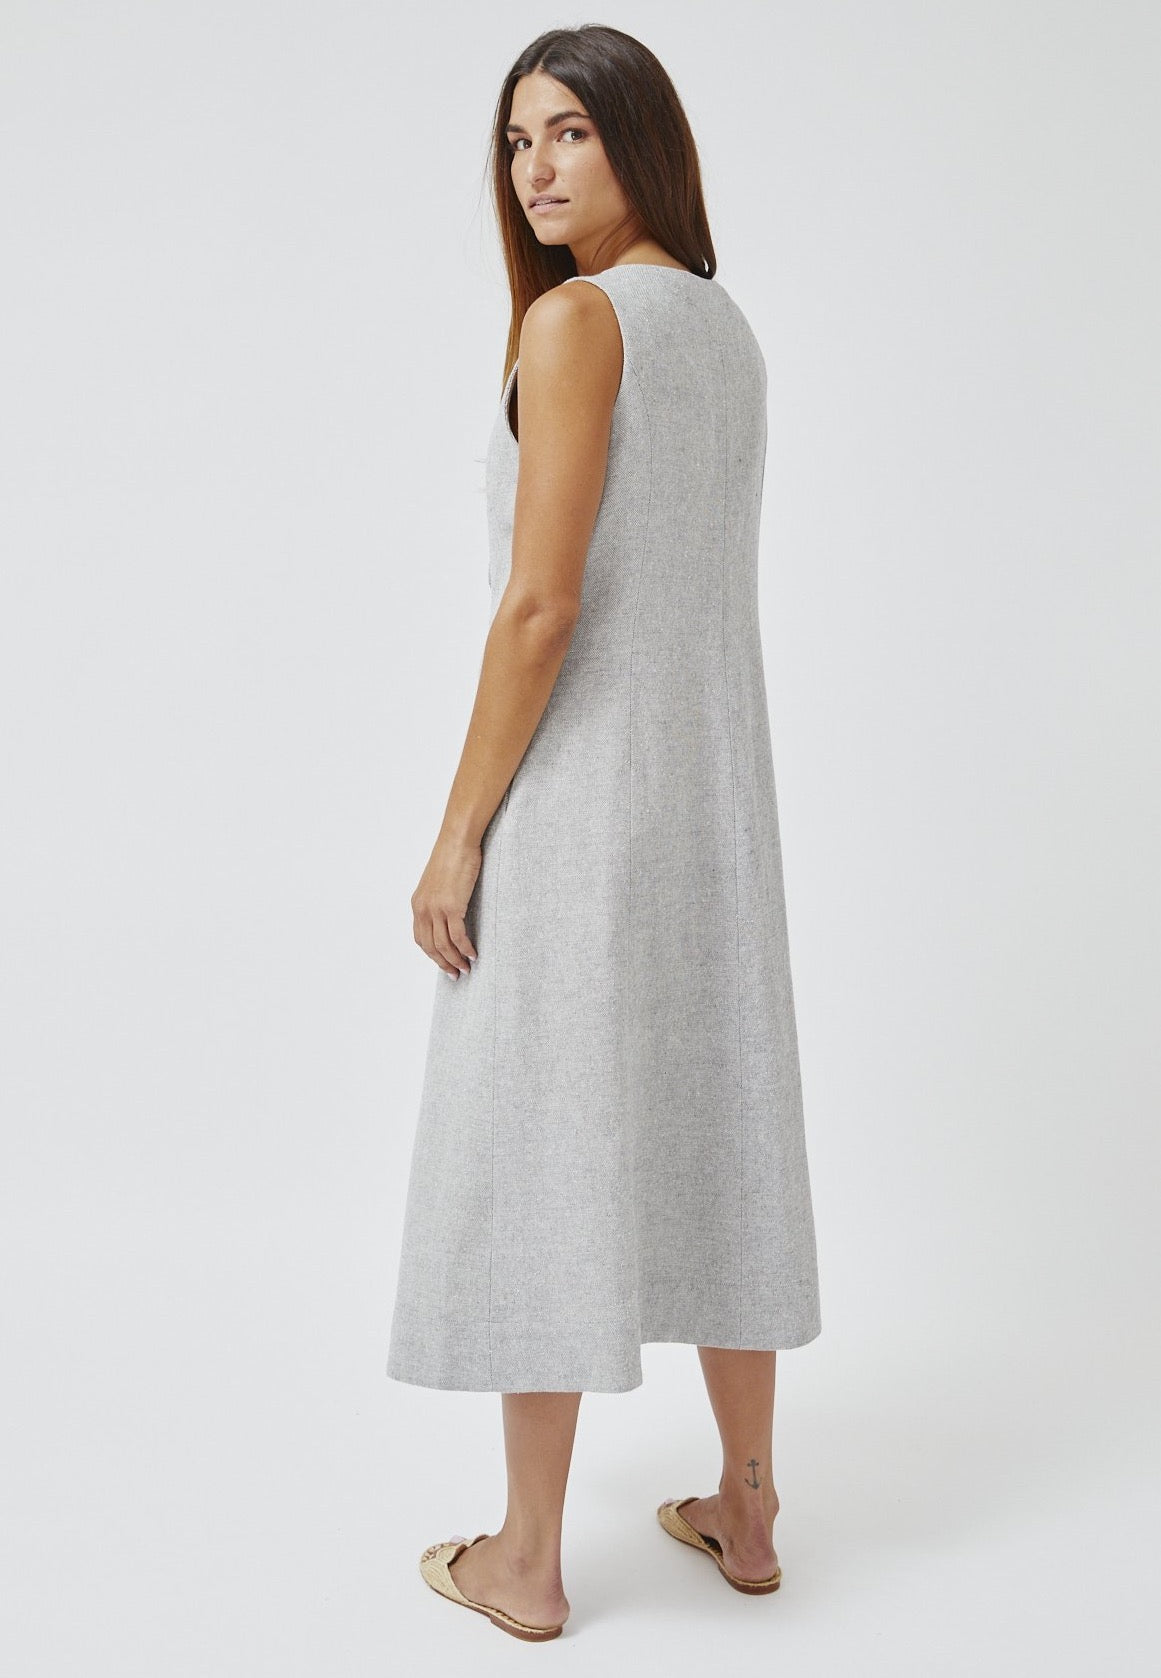 THE SCALLOP WRAP DRESS in VINTAGE BLUE SUMMER TWEED LINEN